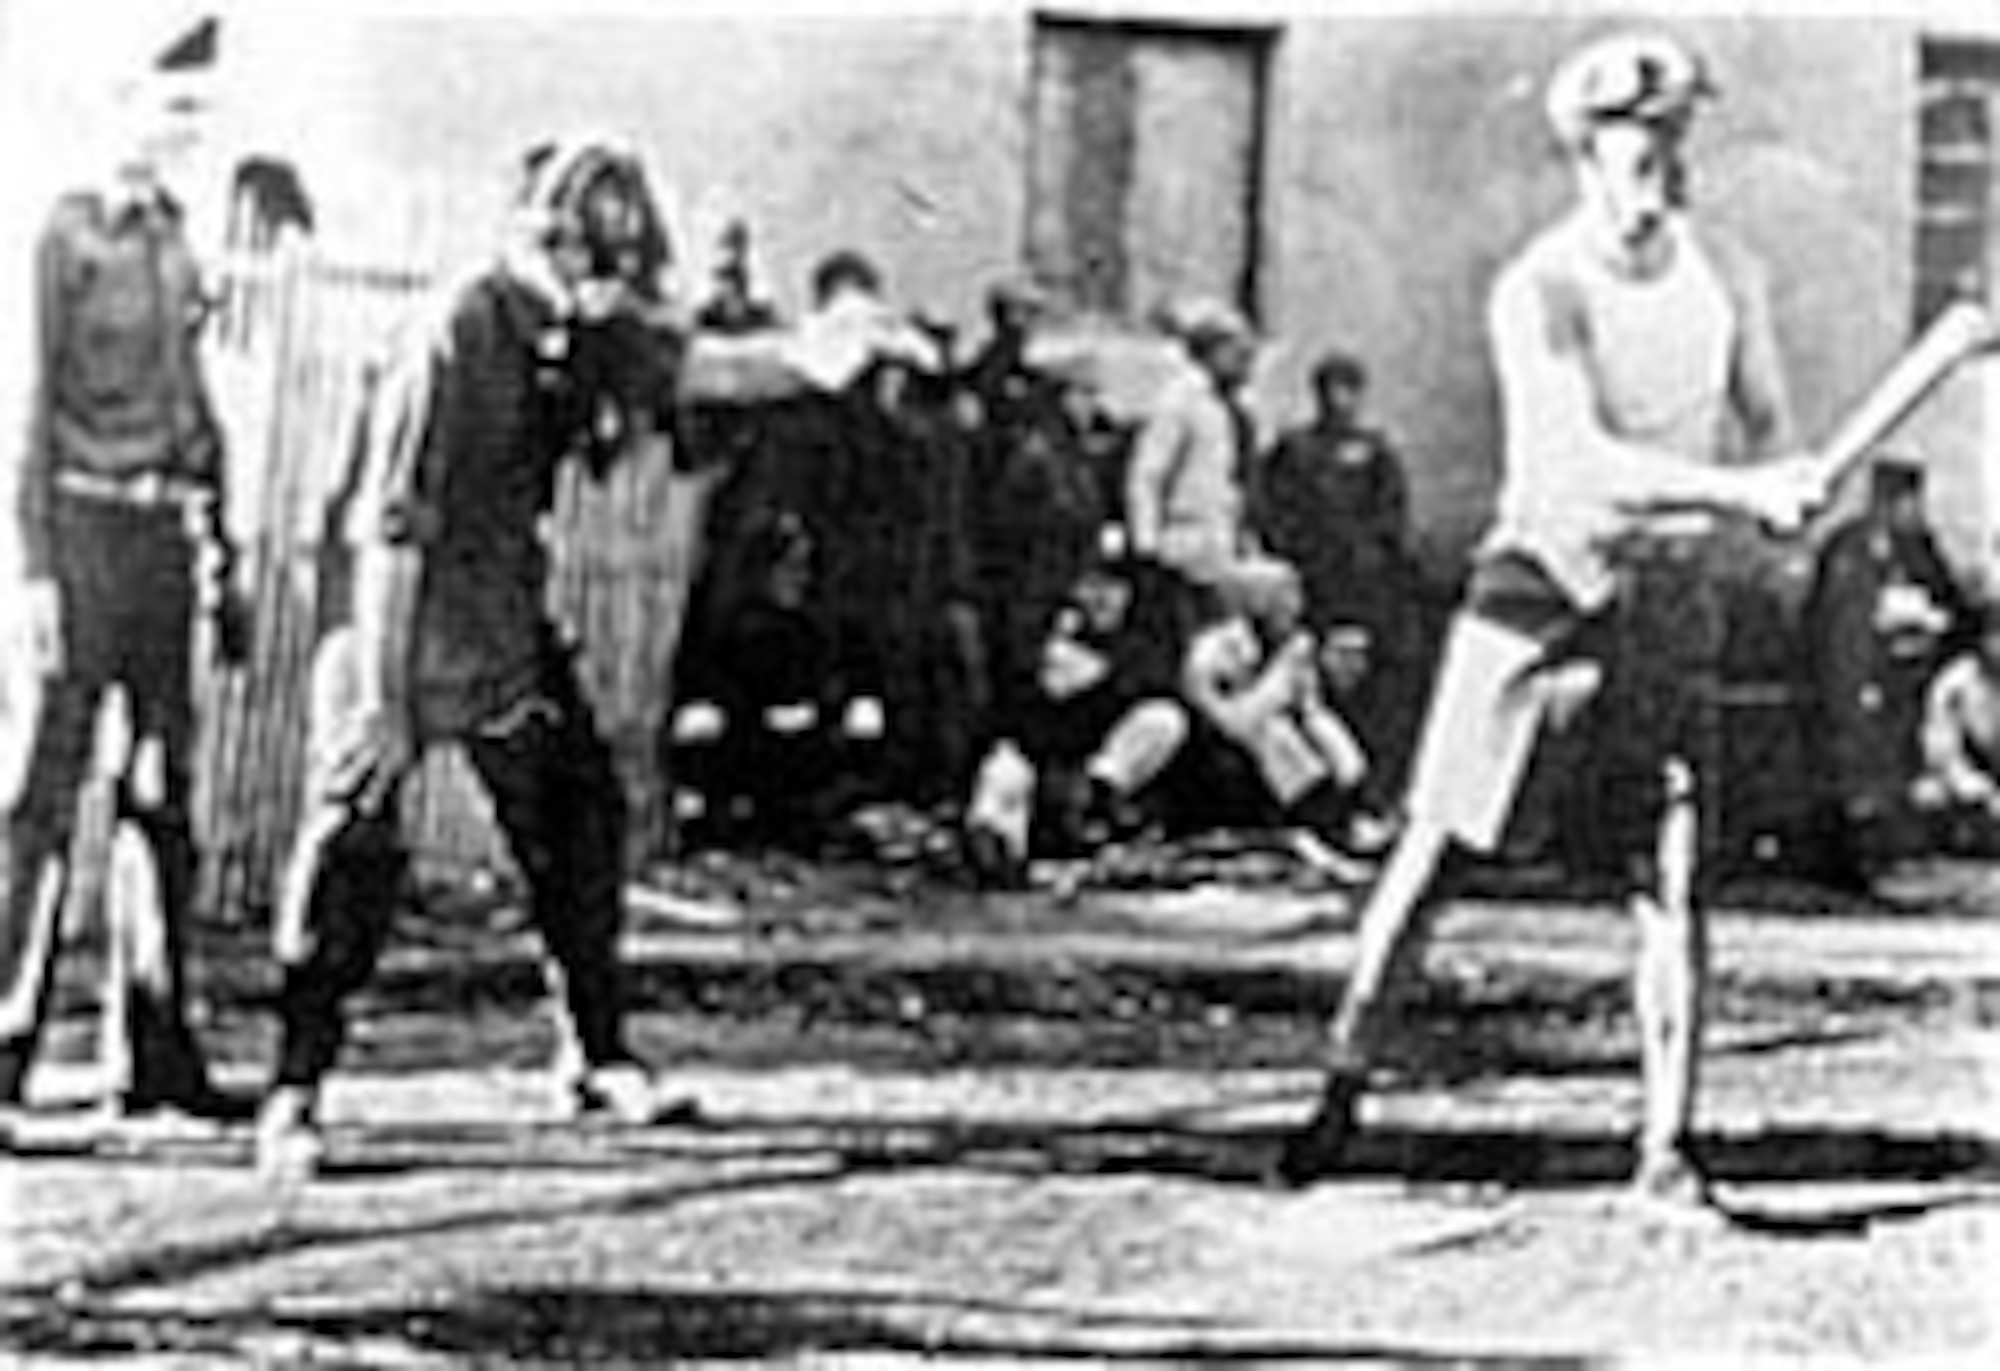 Brig. Gen. Claire Chennault, commander of the 14th Air Force, at the plate. (U.S. Air Force photo)